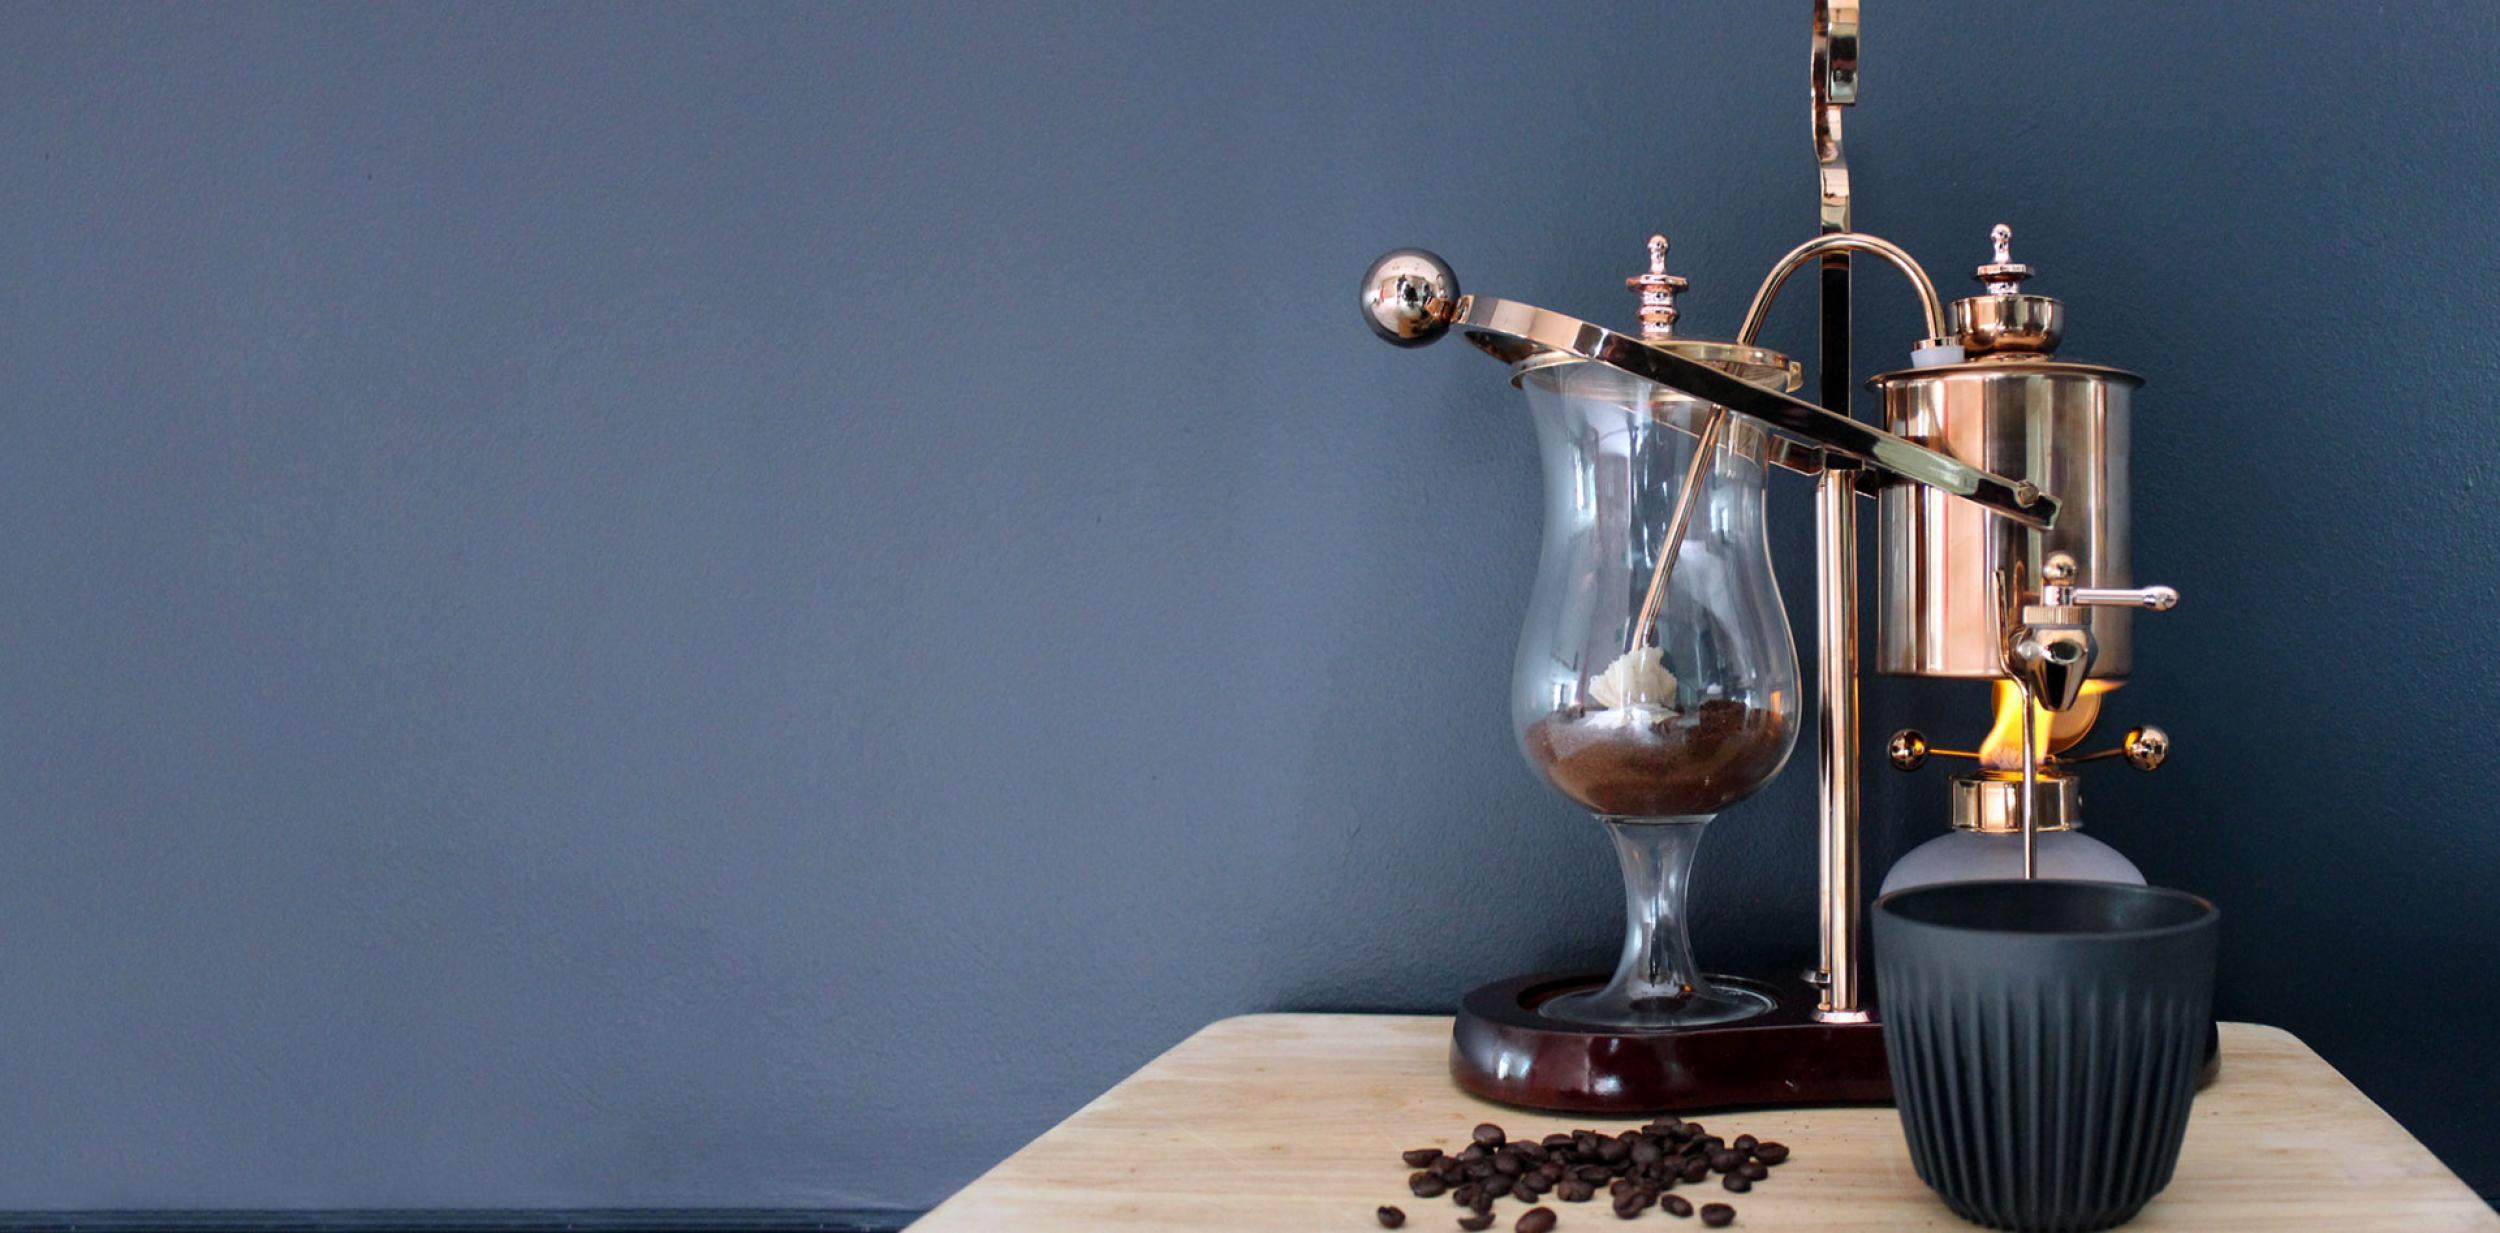 An old-style coffee machine sat upon a wooden table against a grey background